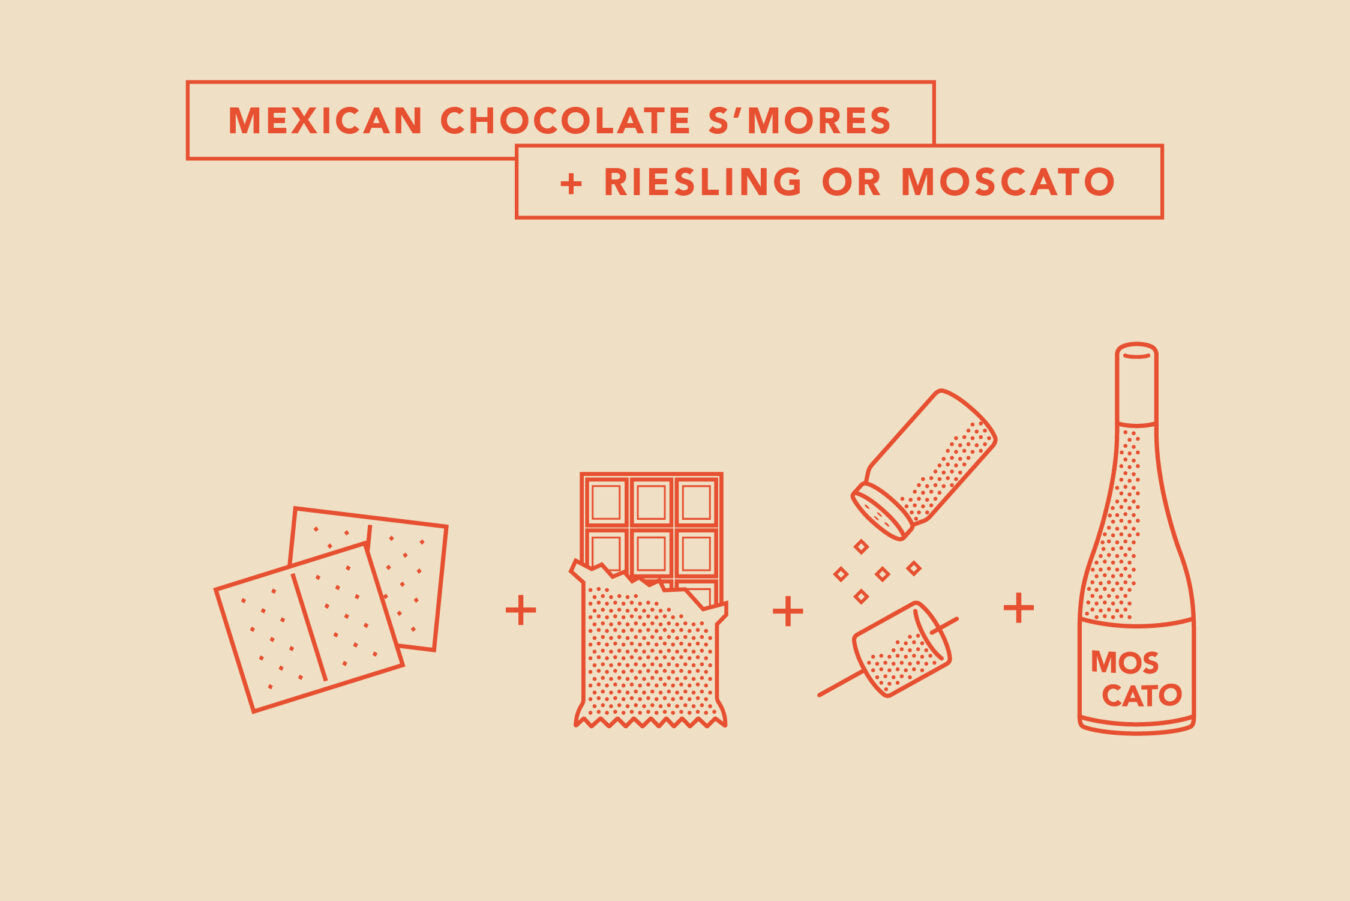 Mexican chocolate s'mores and wine pairing